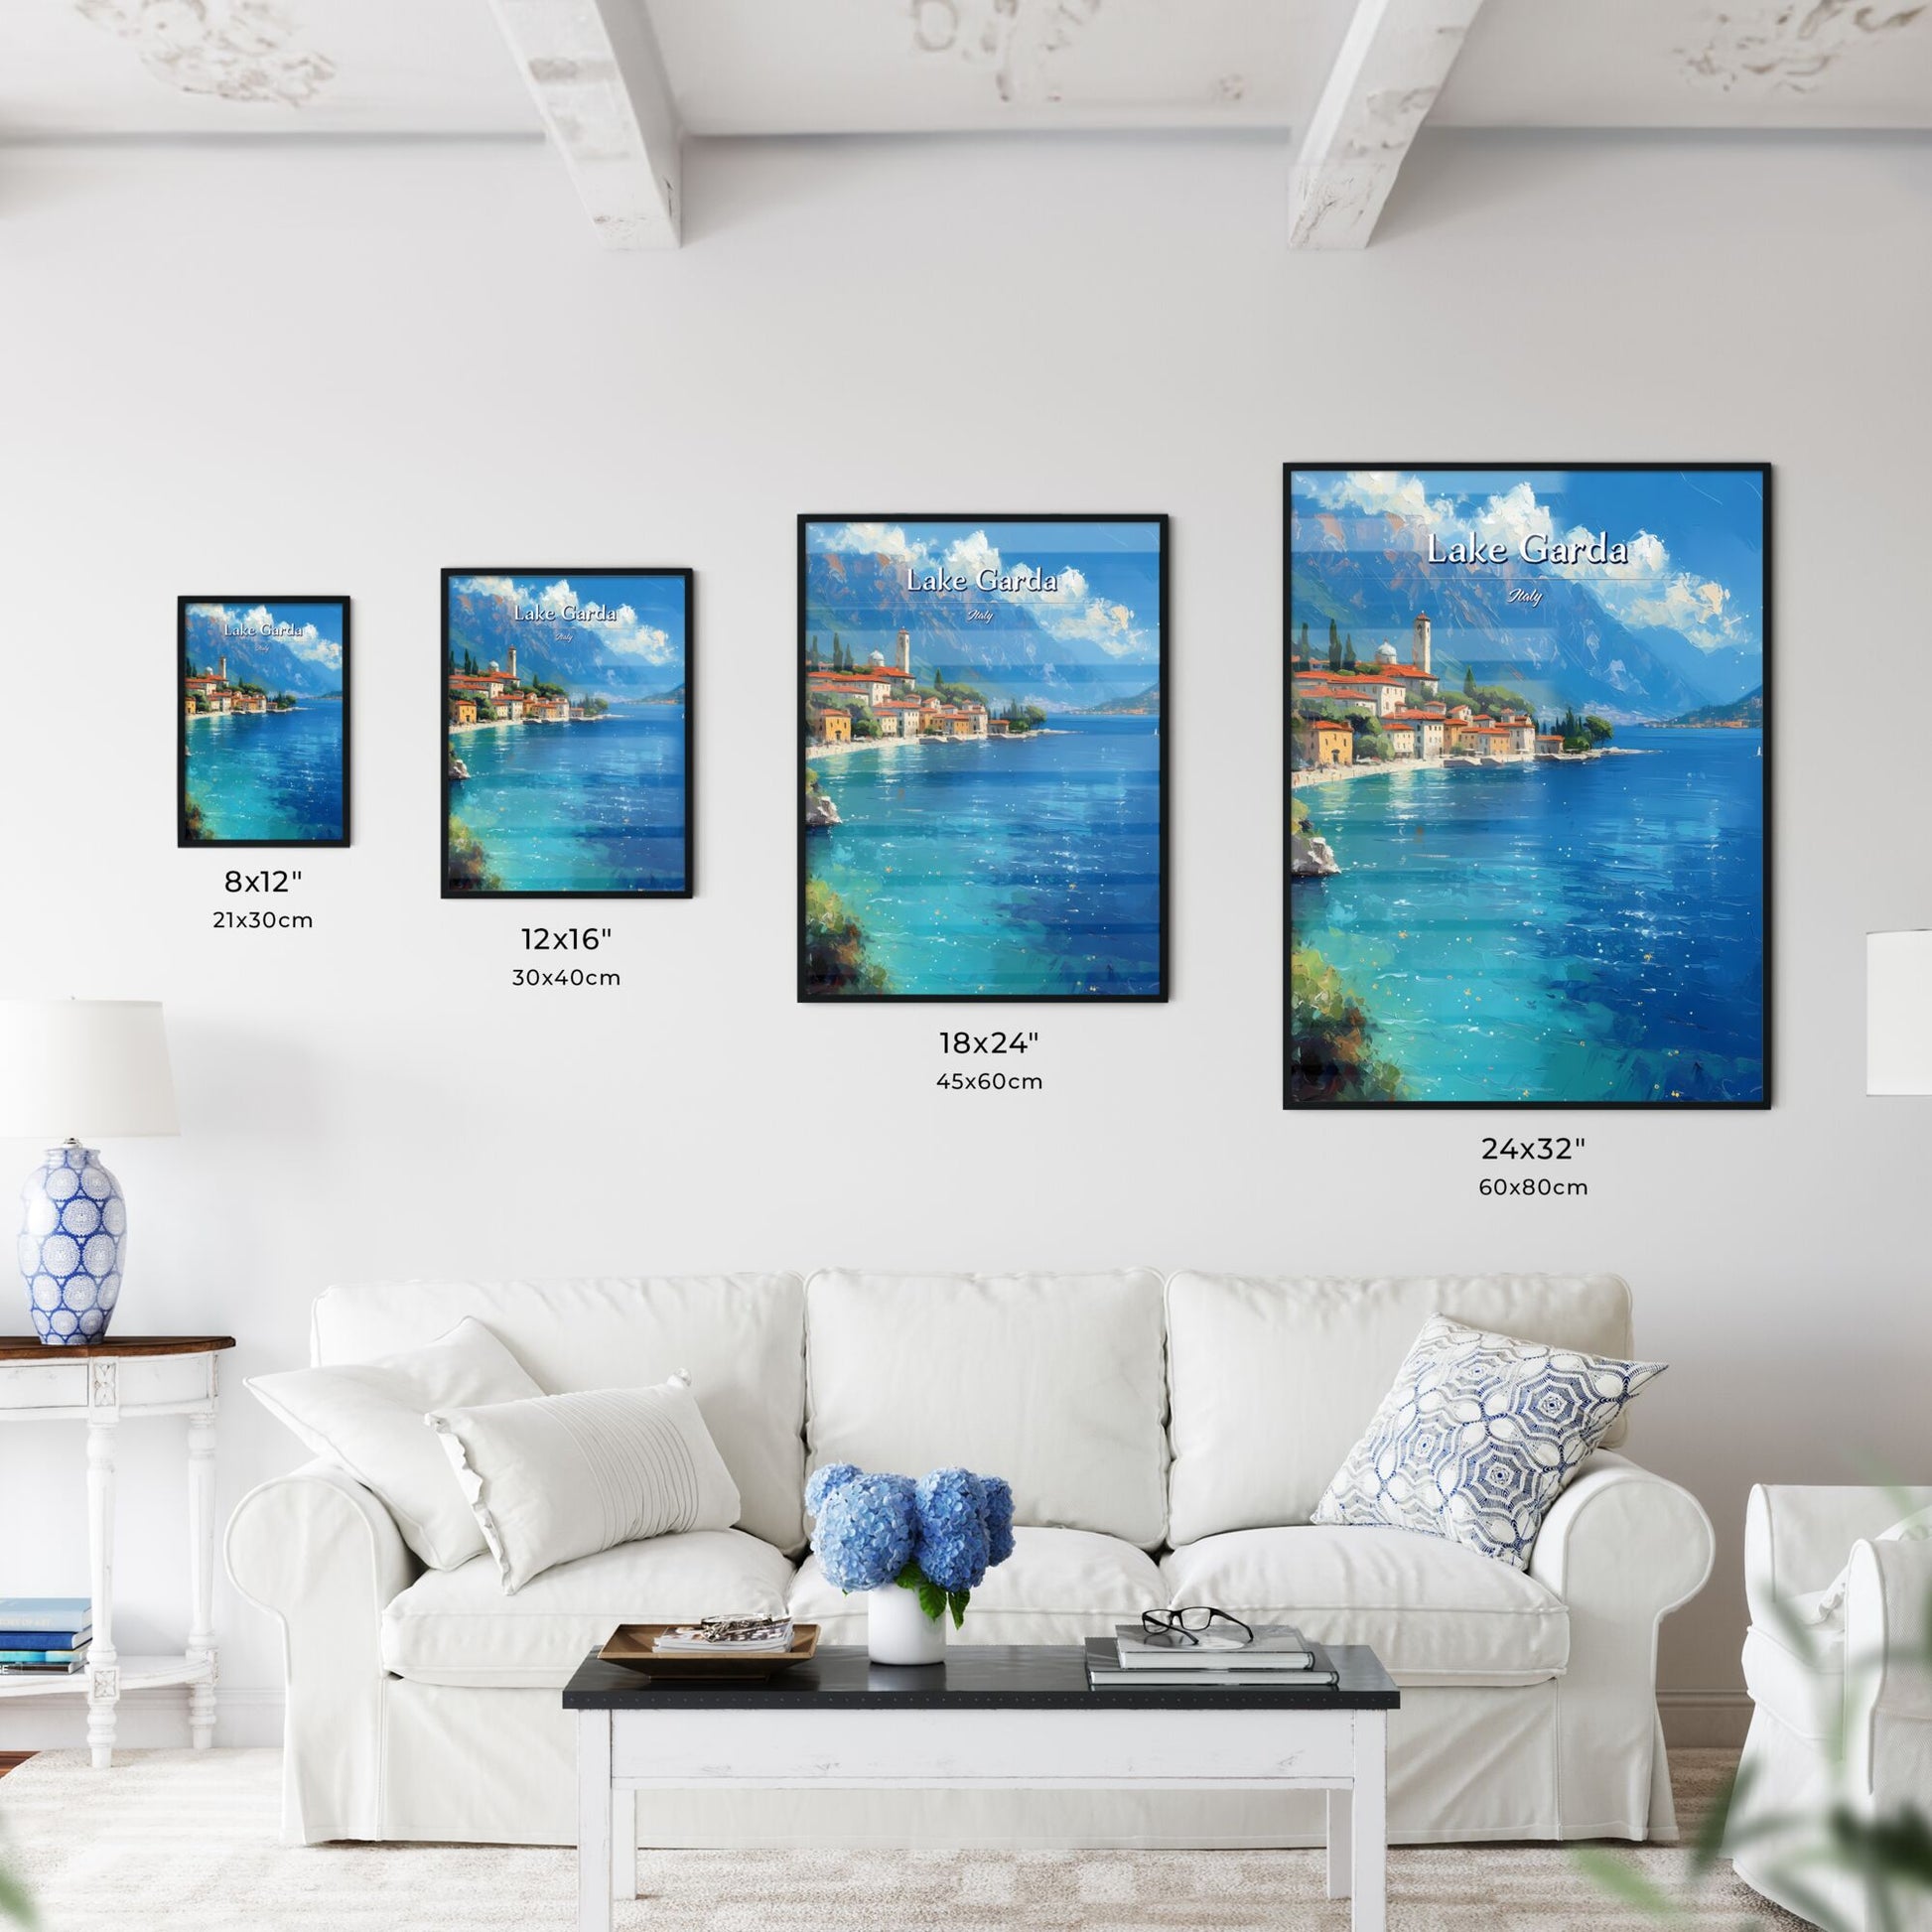 Lake Garda, Italy - Art print of a town next to a body of water Default Title